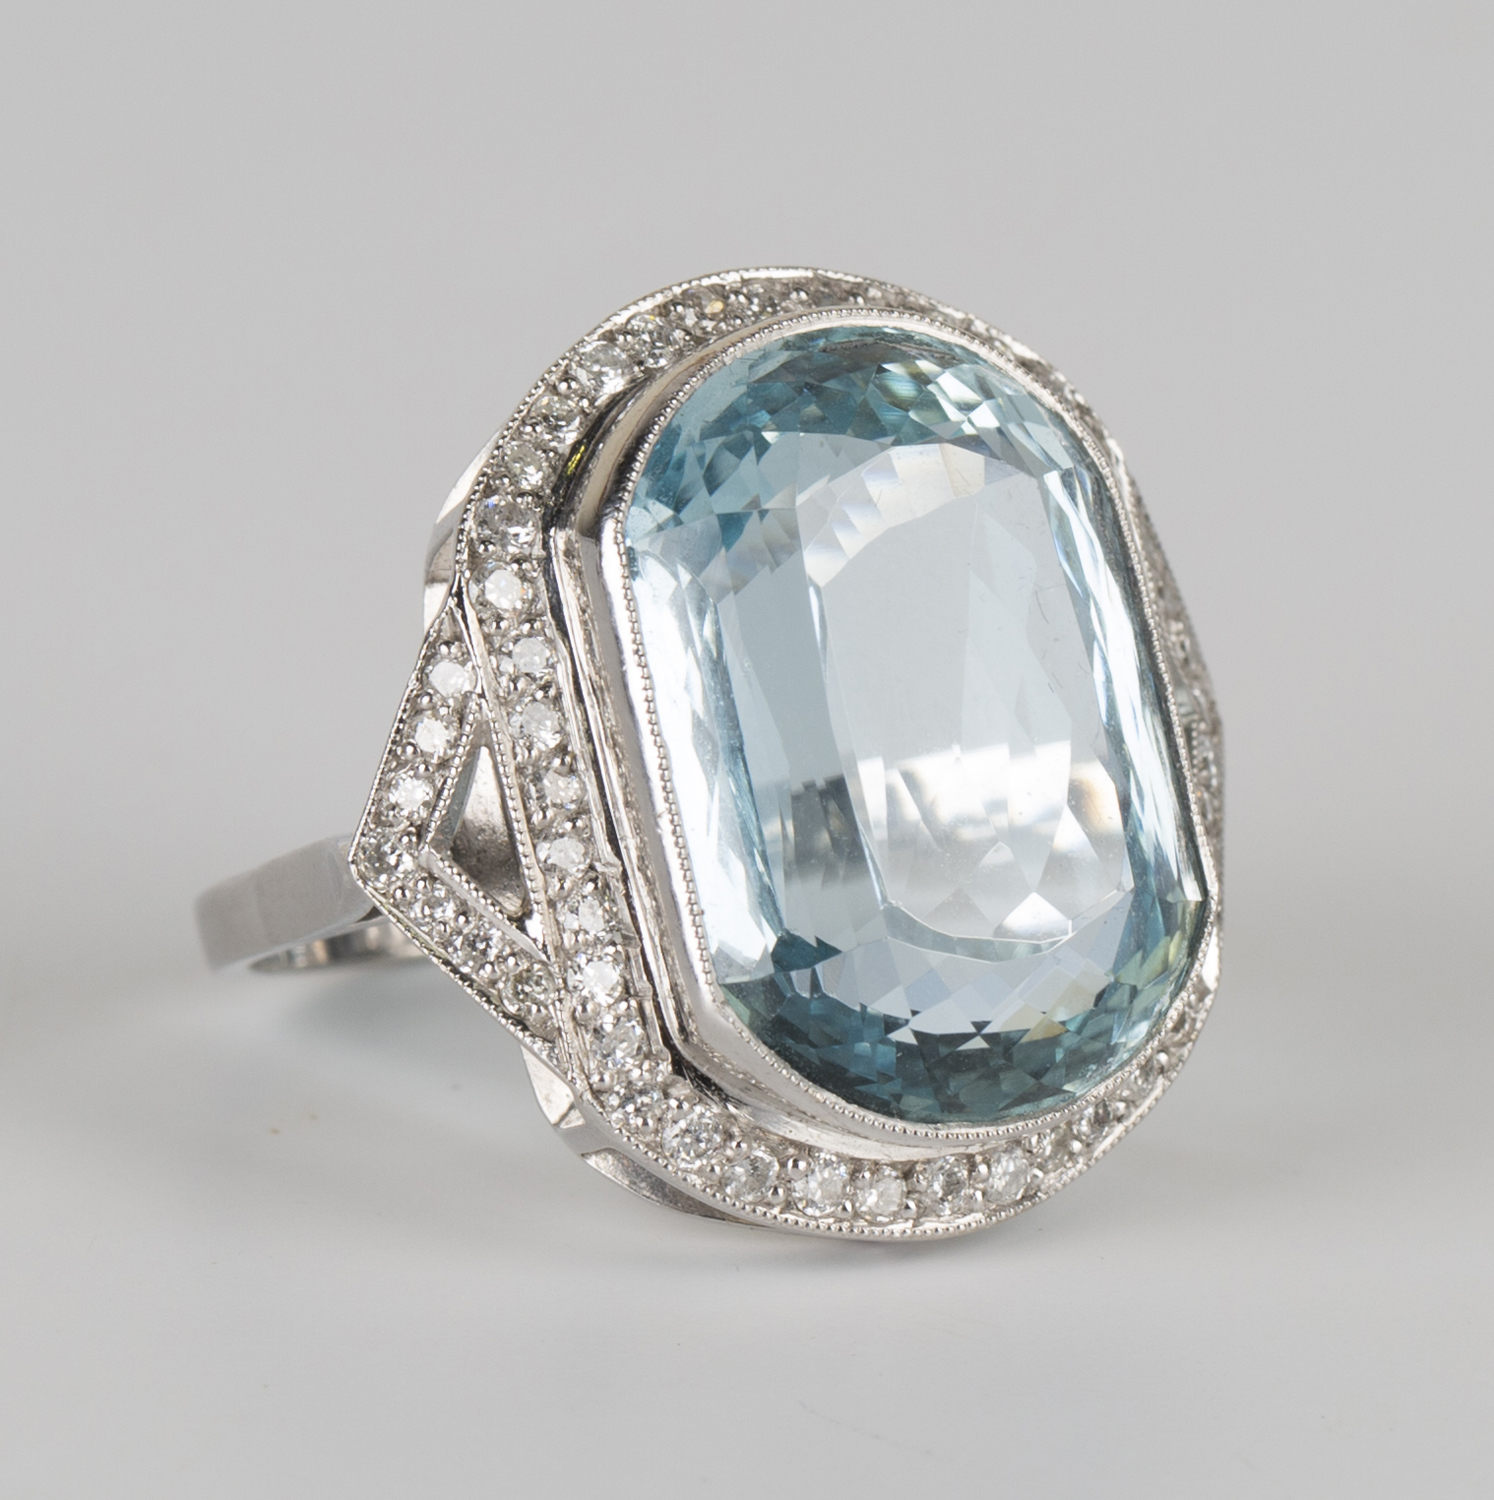 An 18ct white gold, aquamarine and diamond ring, collet set with a large oval cut aquamarine